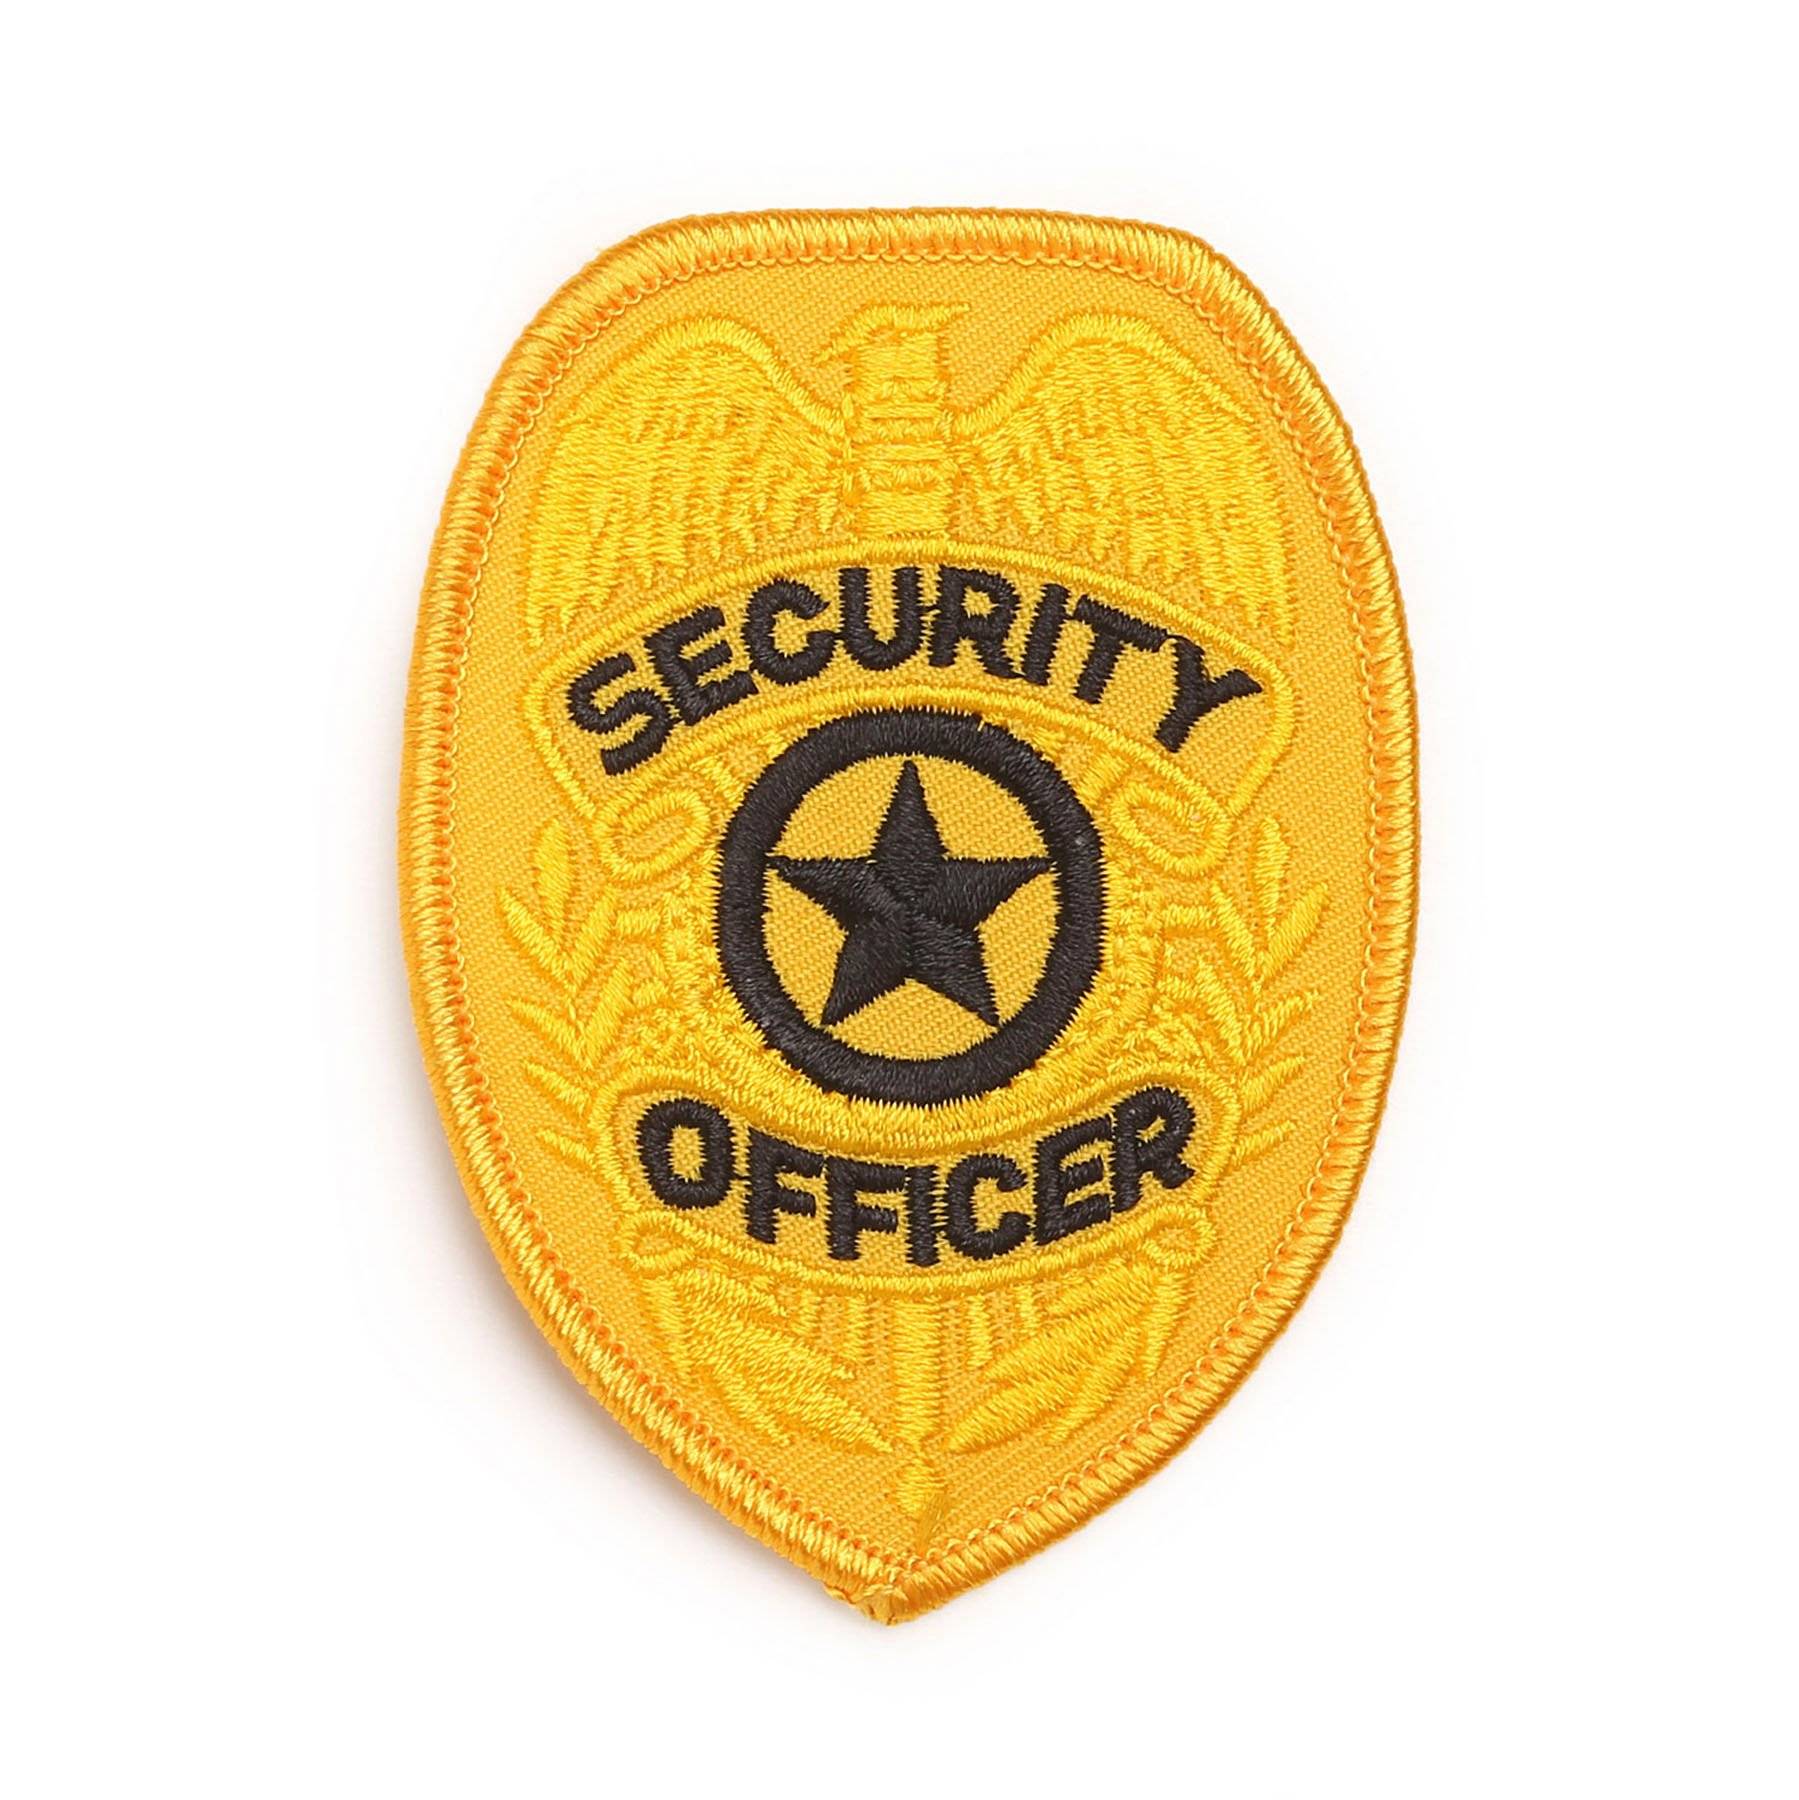 LAWPRO SECURITY OFFICER SHIELD PATCH GOLD OR SILVER